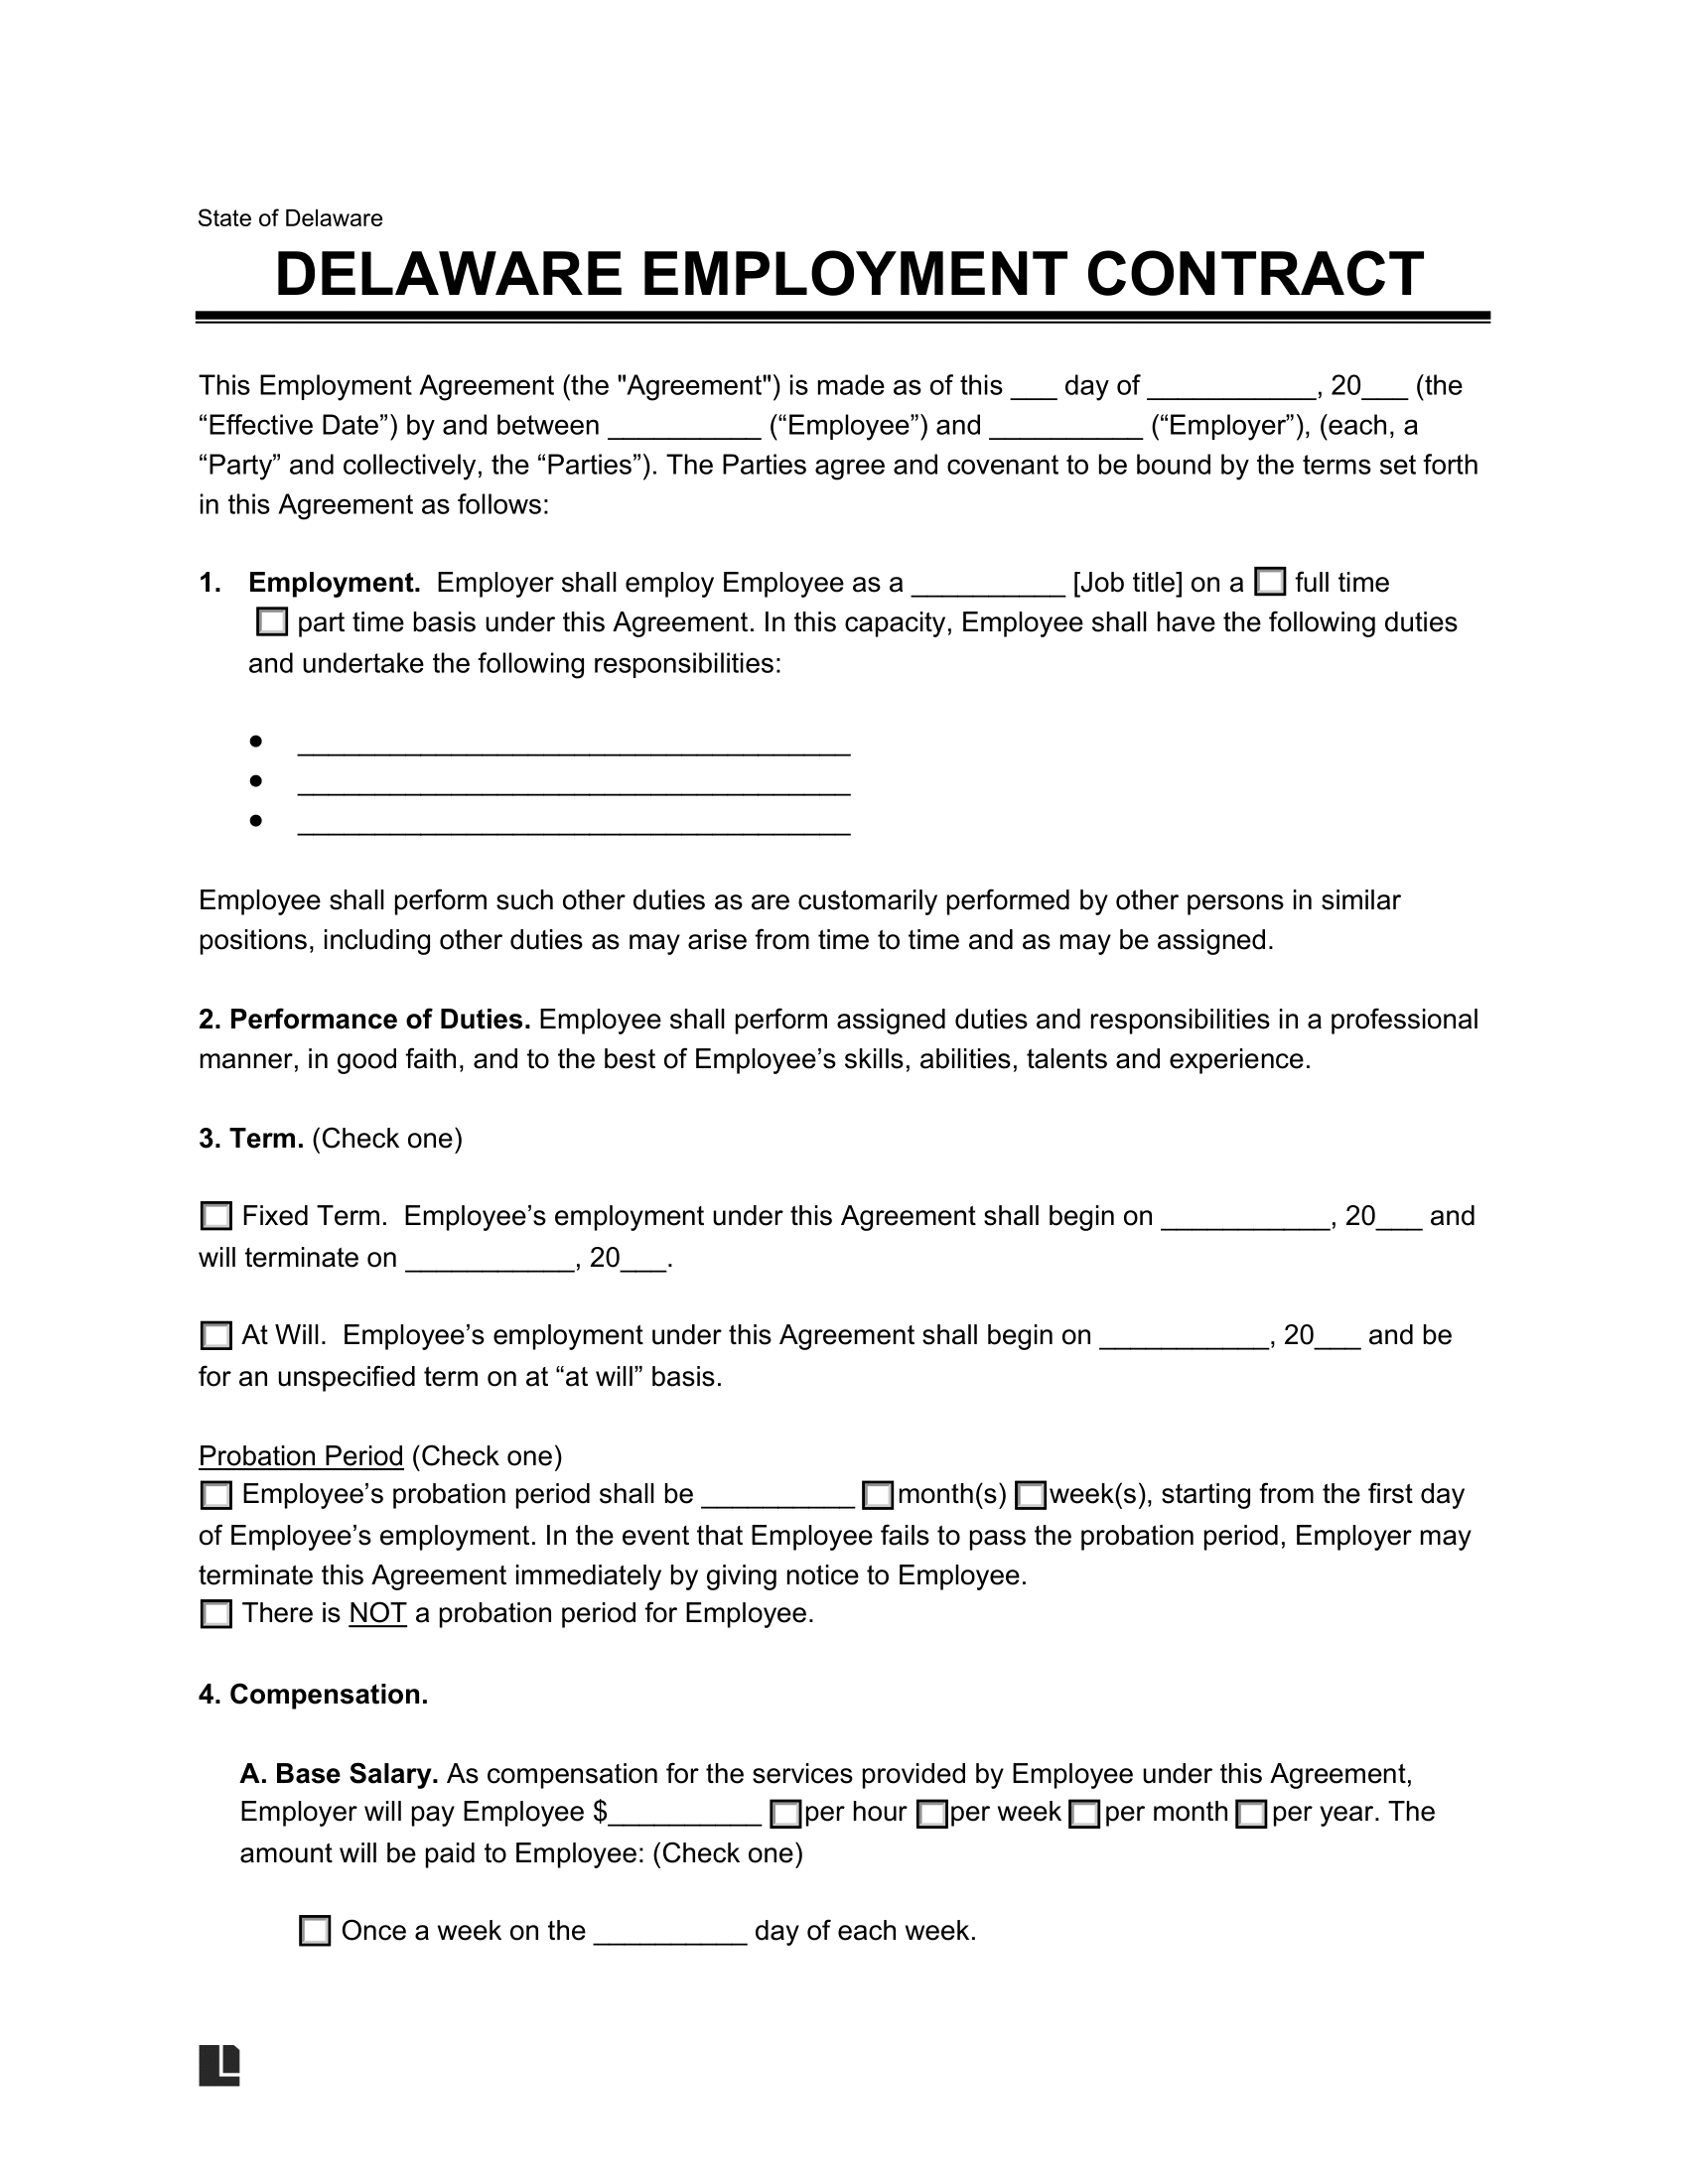 delaware employment contract template